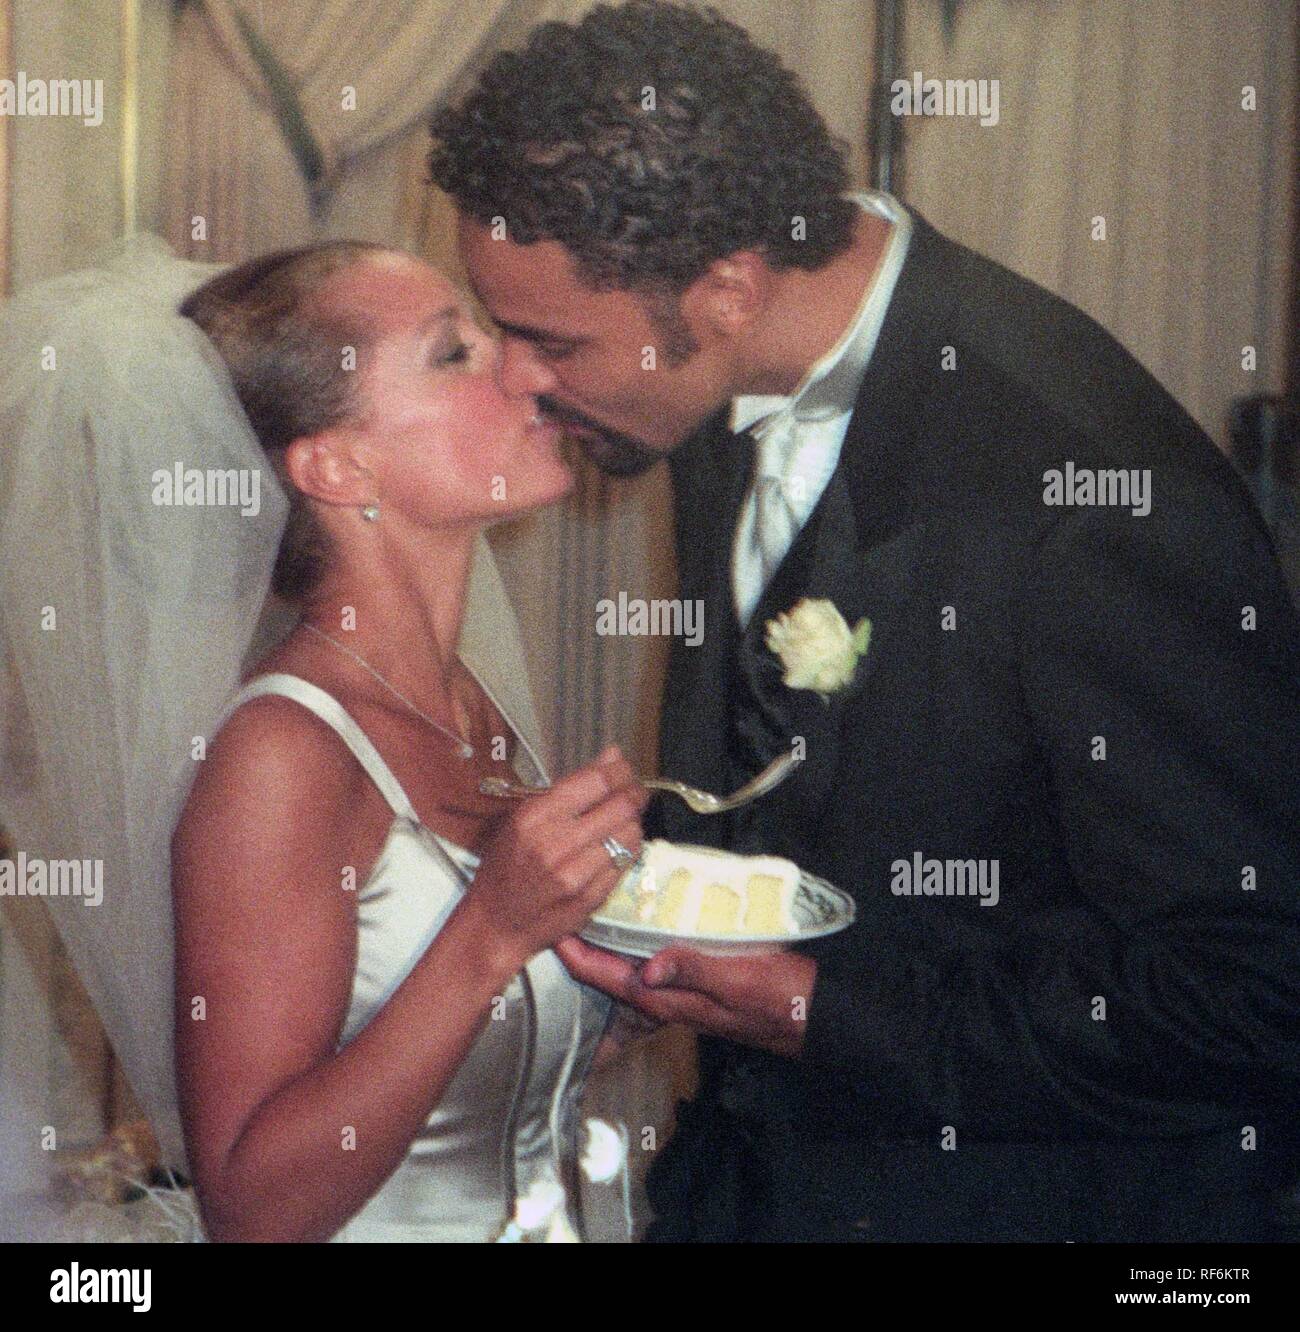 Vanessa williams and rick fox hi-res stock photography and images - Alamy